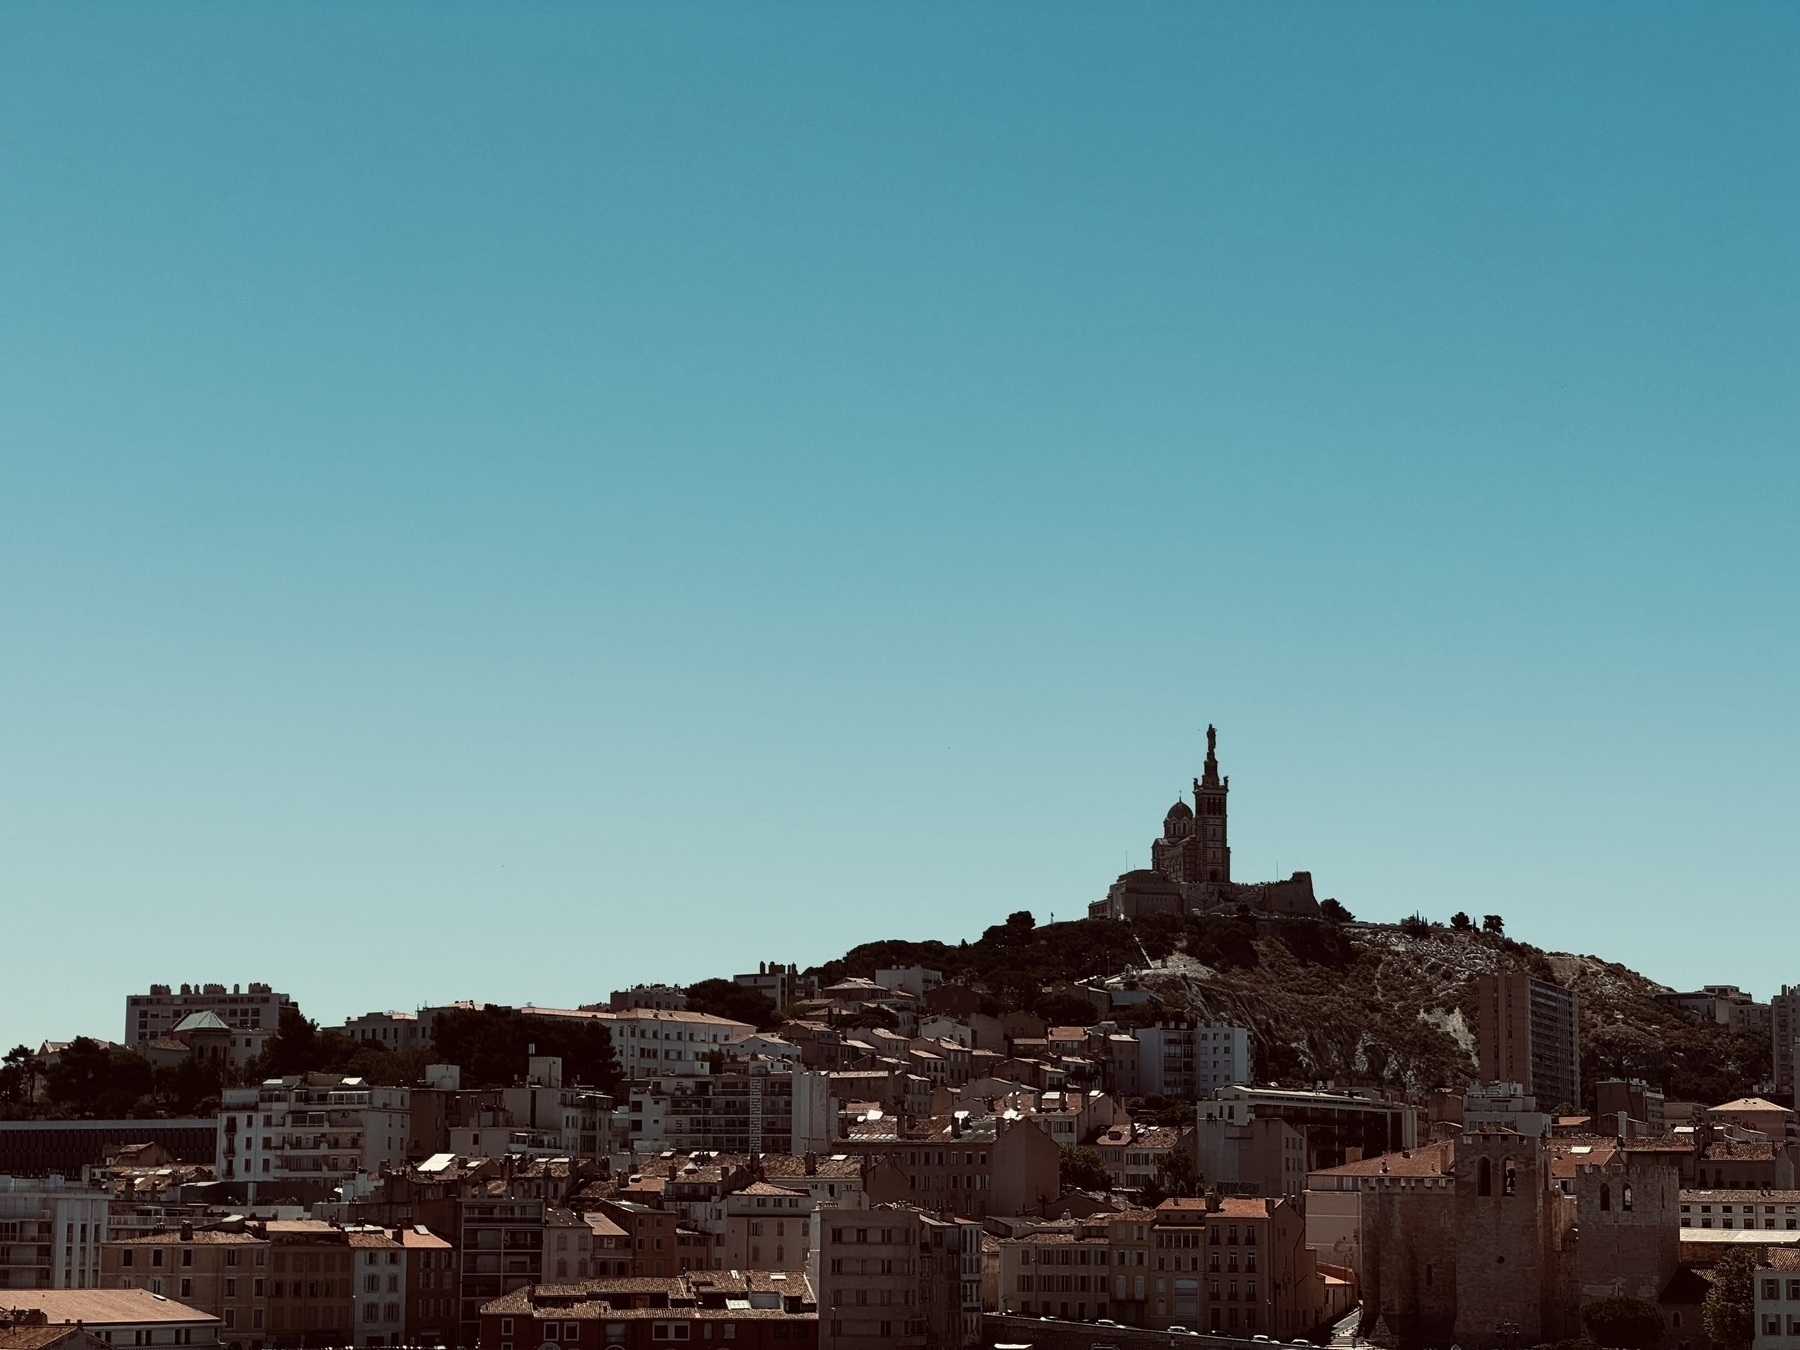 A church perched on the top of a hill under a clear sky, looking down on the city below.